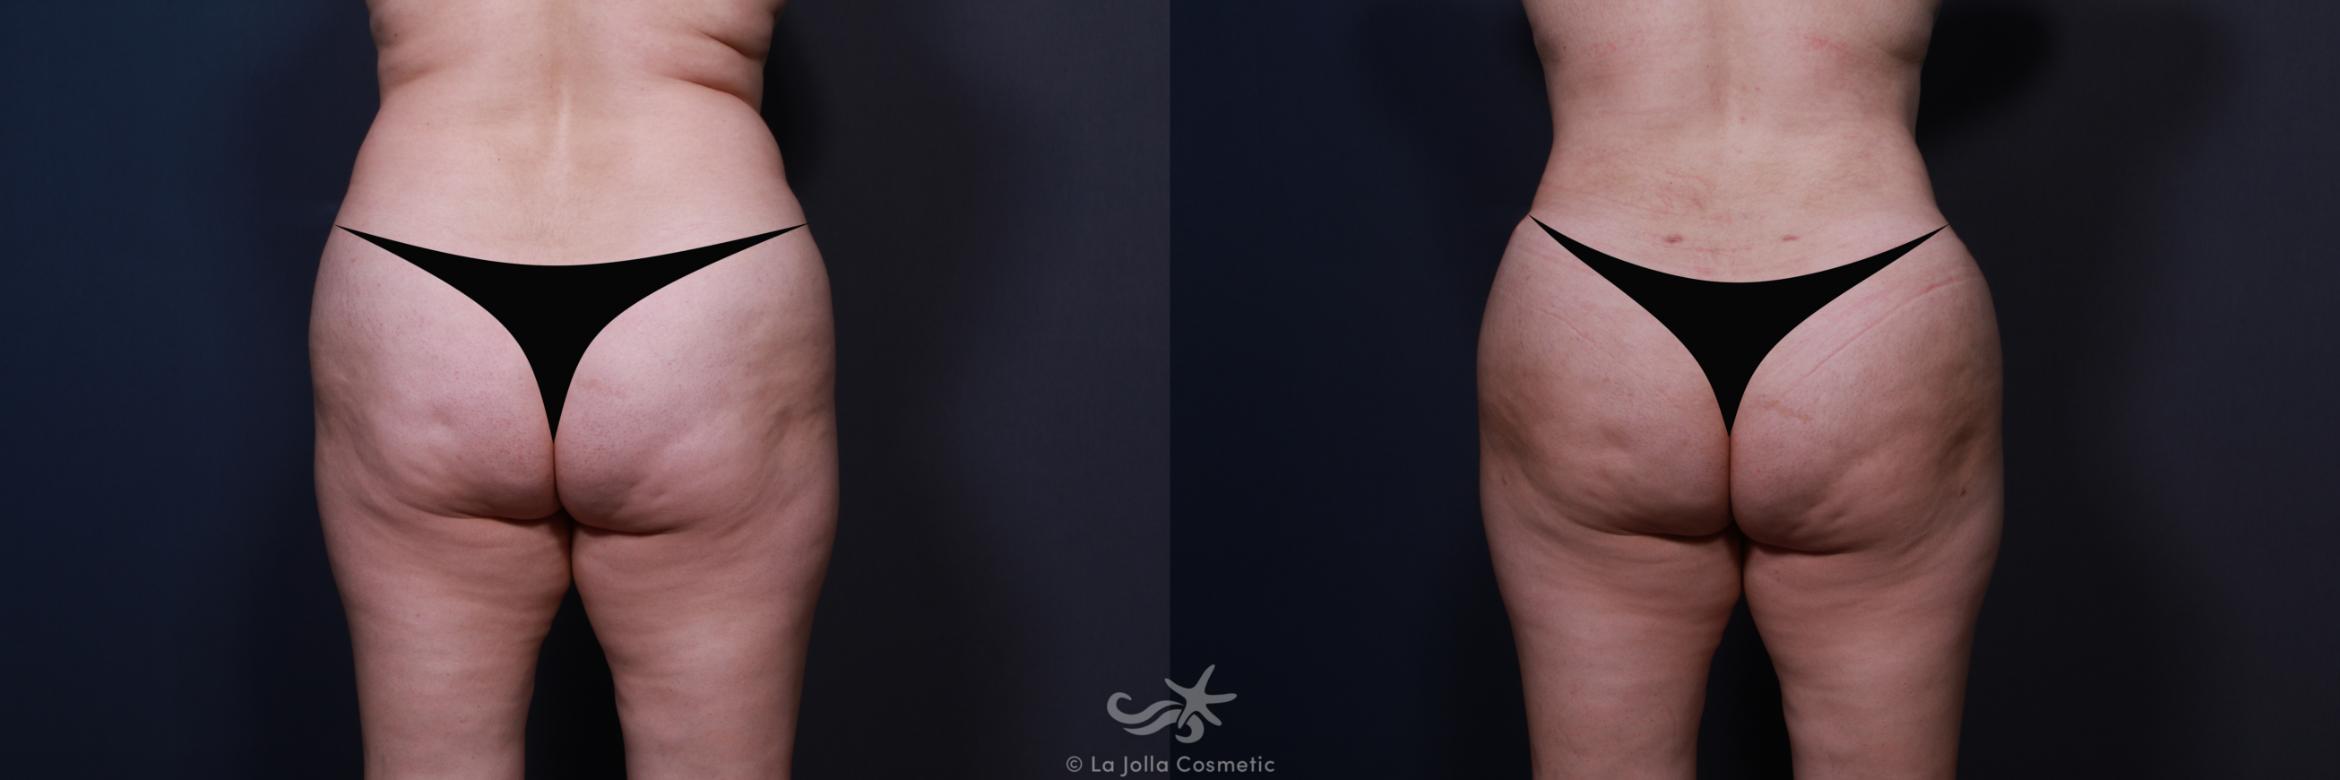 Before & After Tummy Tuck Result 579 Back BBL View in San Diego, CA